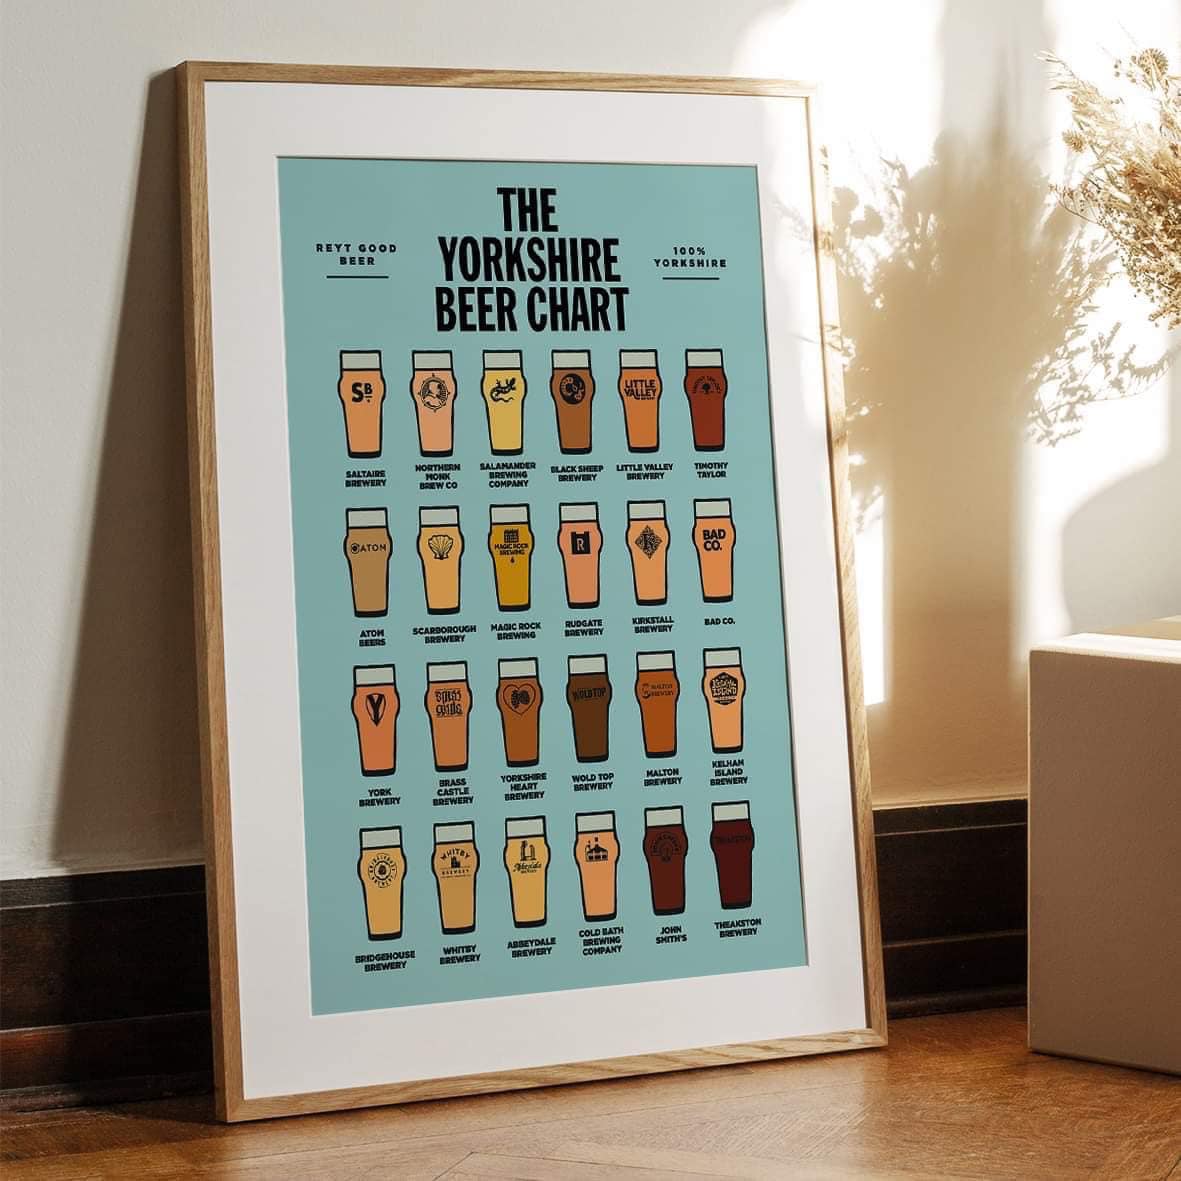 The Yorkshire Beer Chart